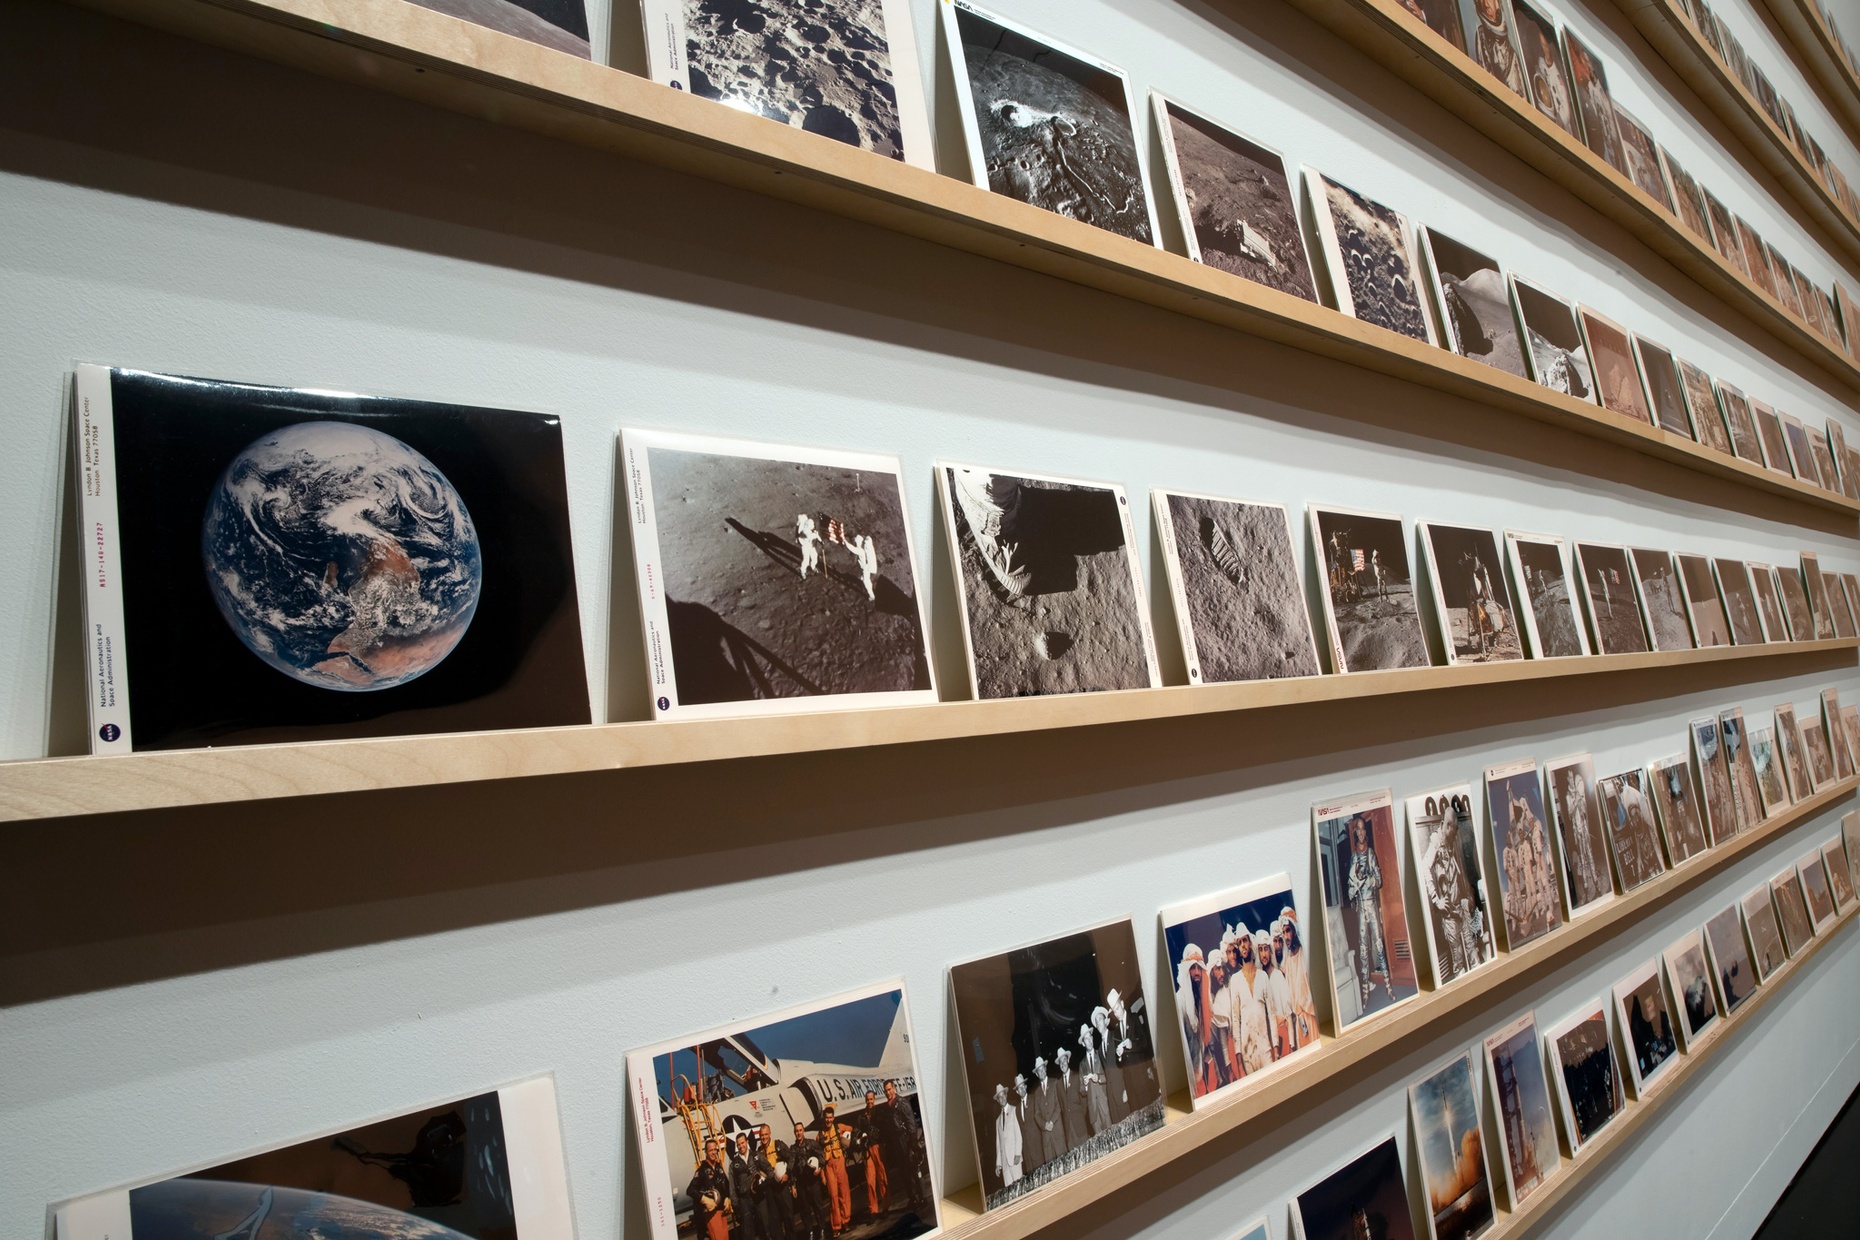 Seen at an angle, a white wall features multiple rows of many small photographs sitting on long, narrow wooden shelves.